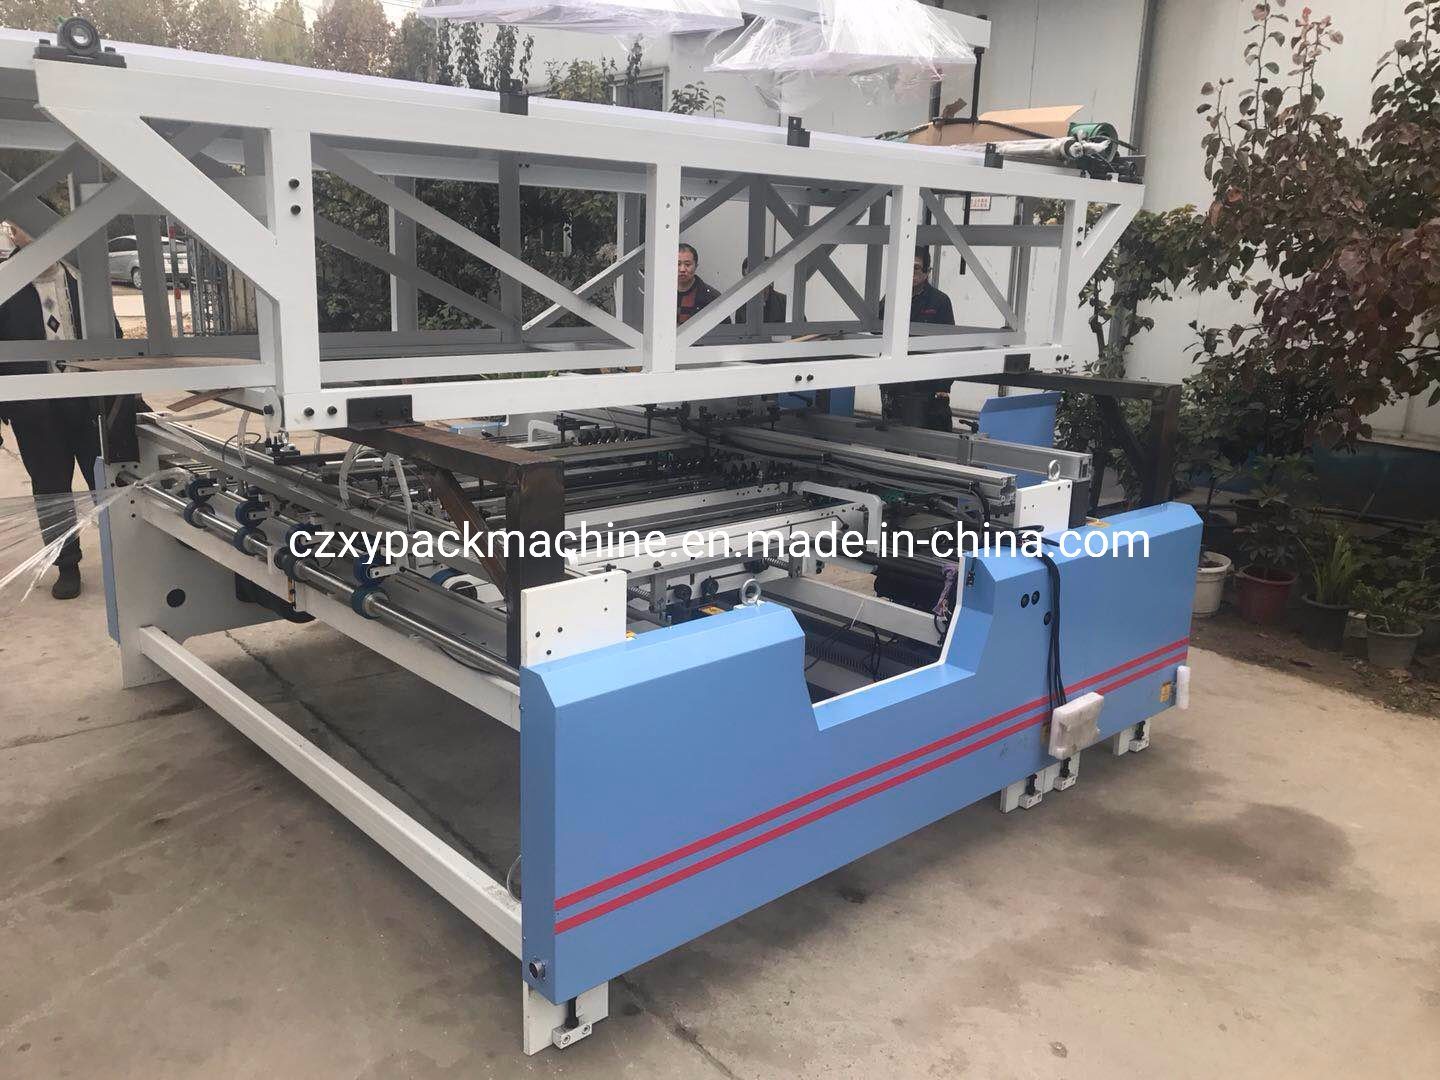 High Speed Double Pieces Corrugated Colorful Box Folder Gluer Machine